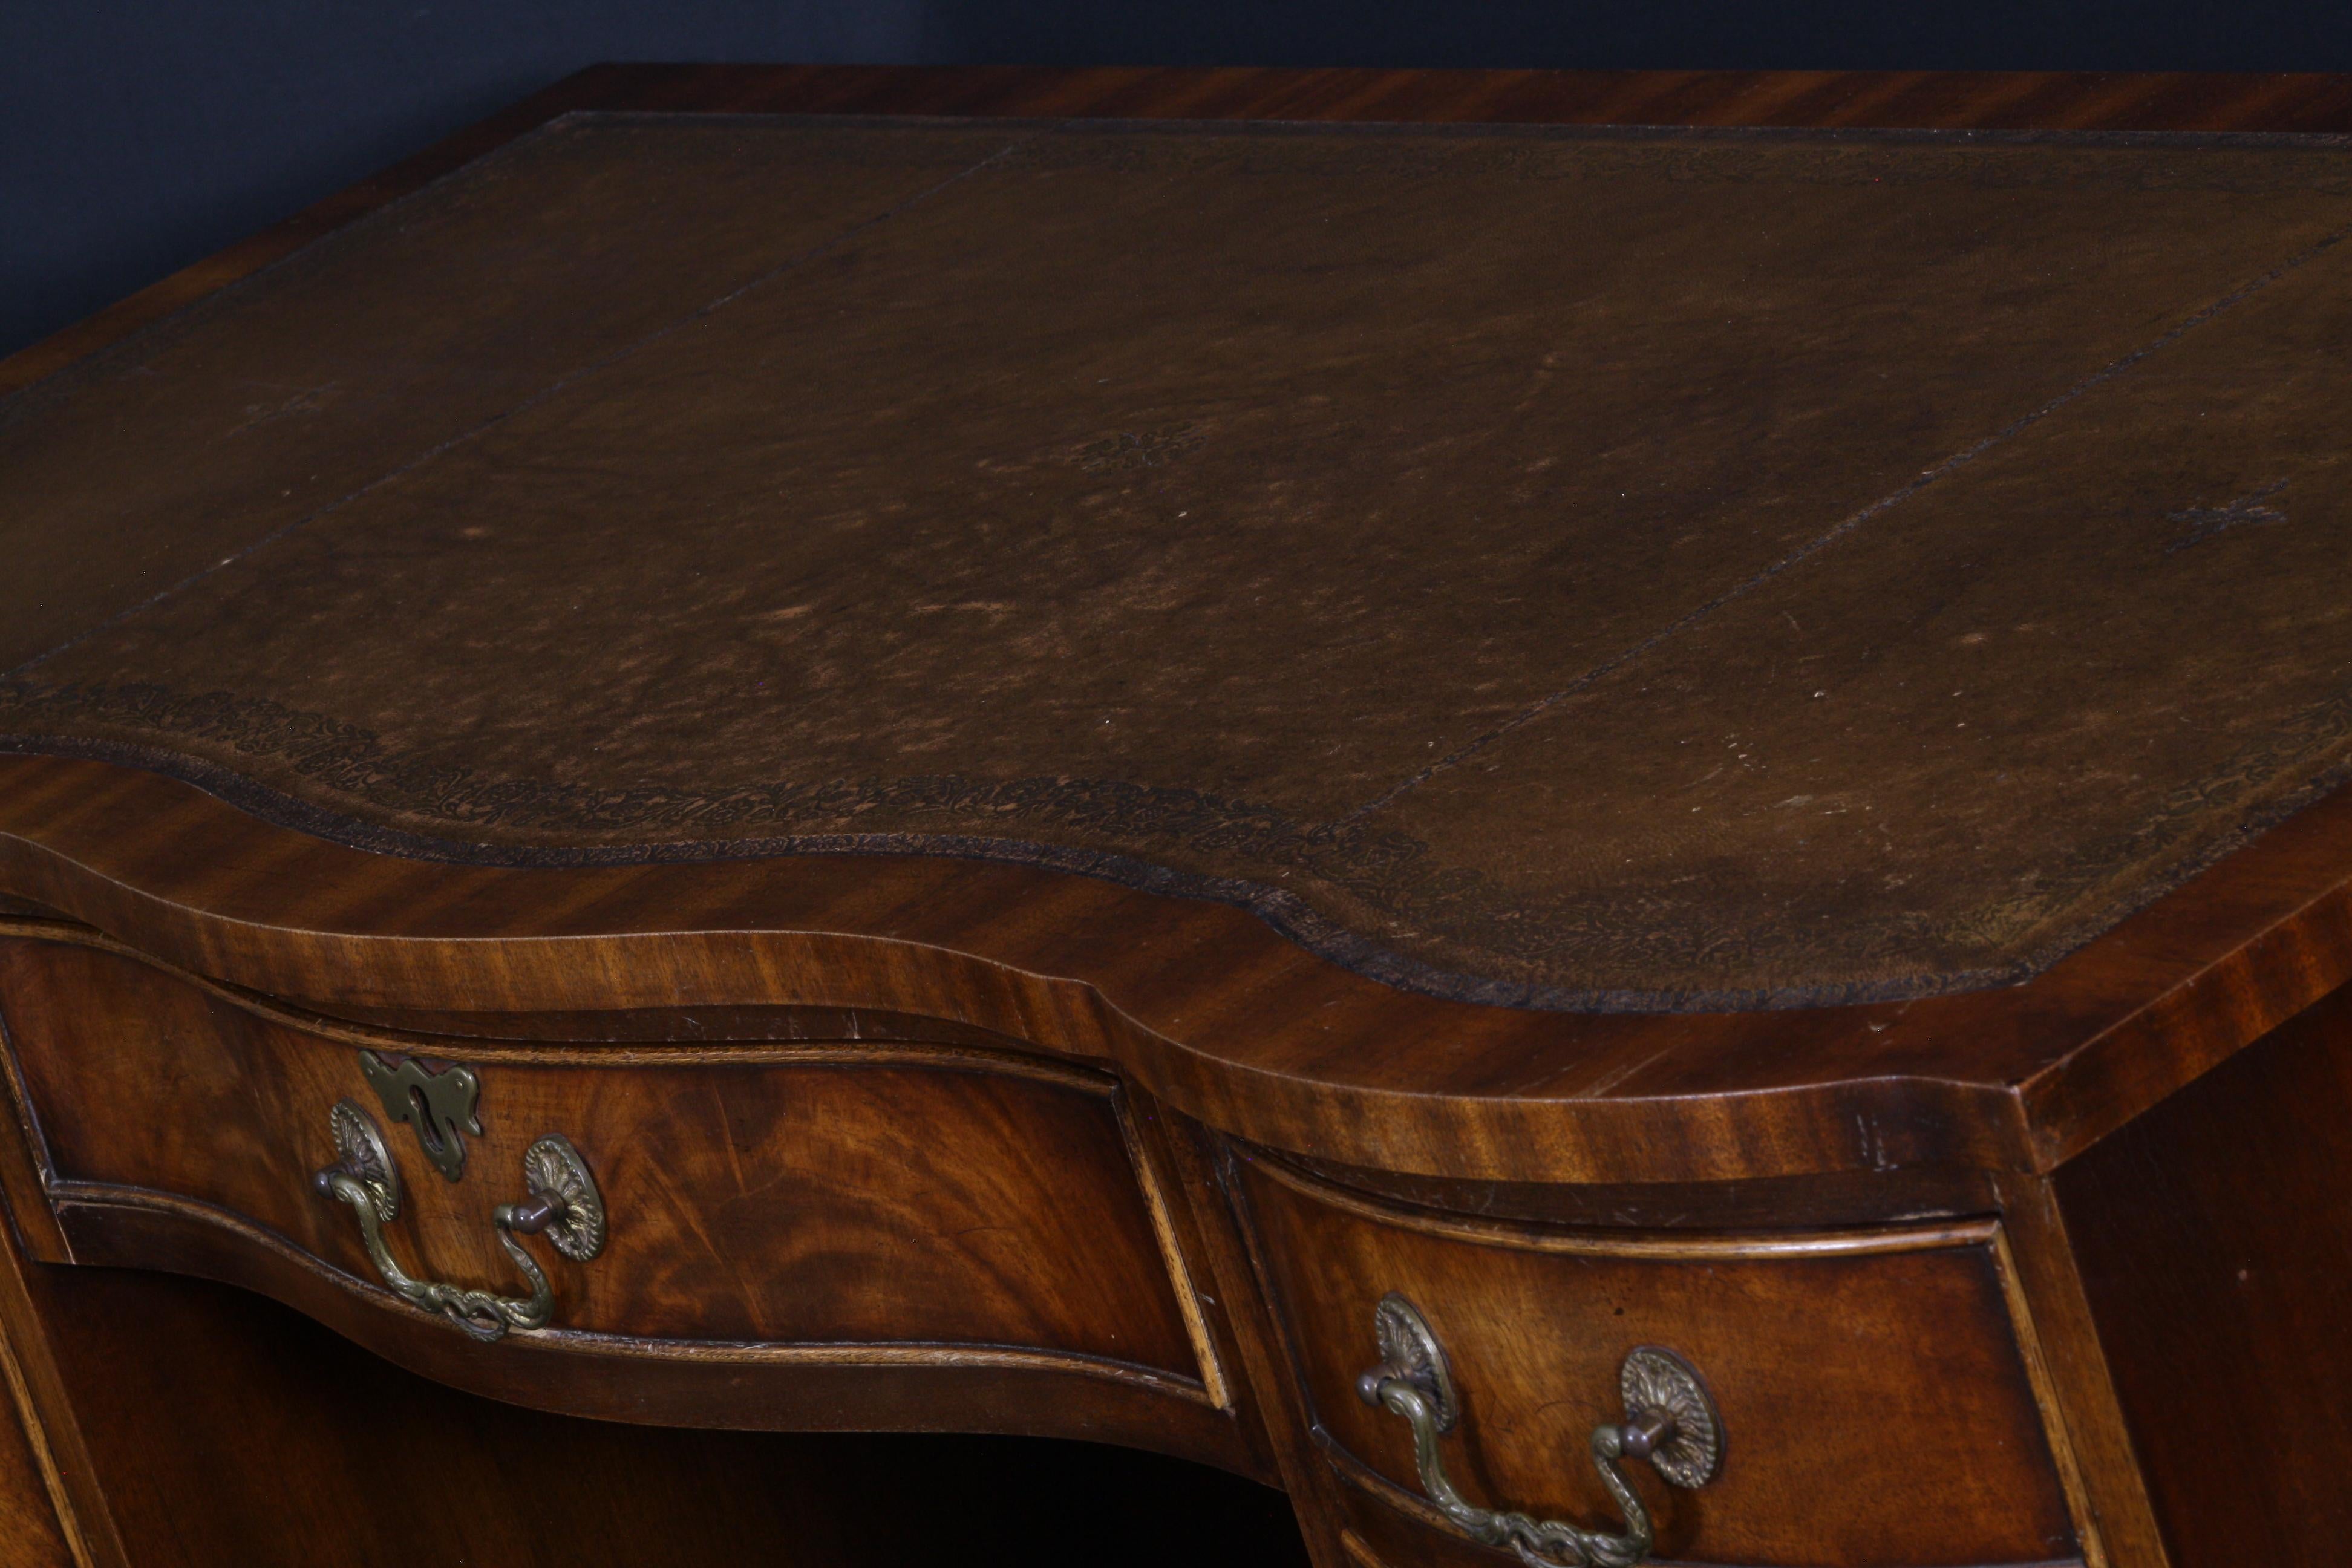 A serpentine curved front, small English kneehole desk in classical mahogany Georgian styling. The goldfish brown tooled leather skiver writing surface embossed with gold tooling has a wonderful patina to it, showing slight use and wear with a minor